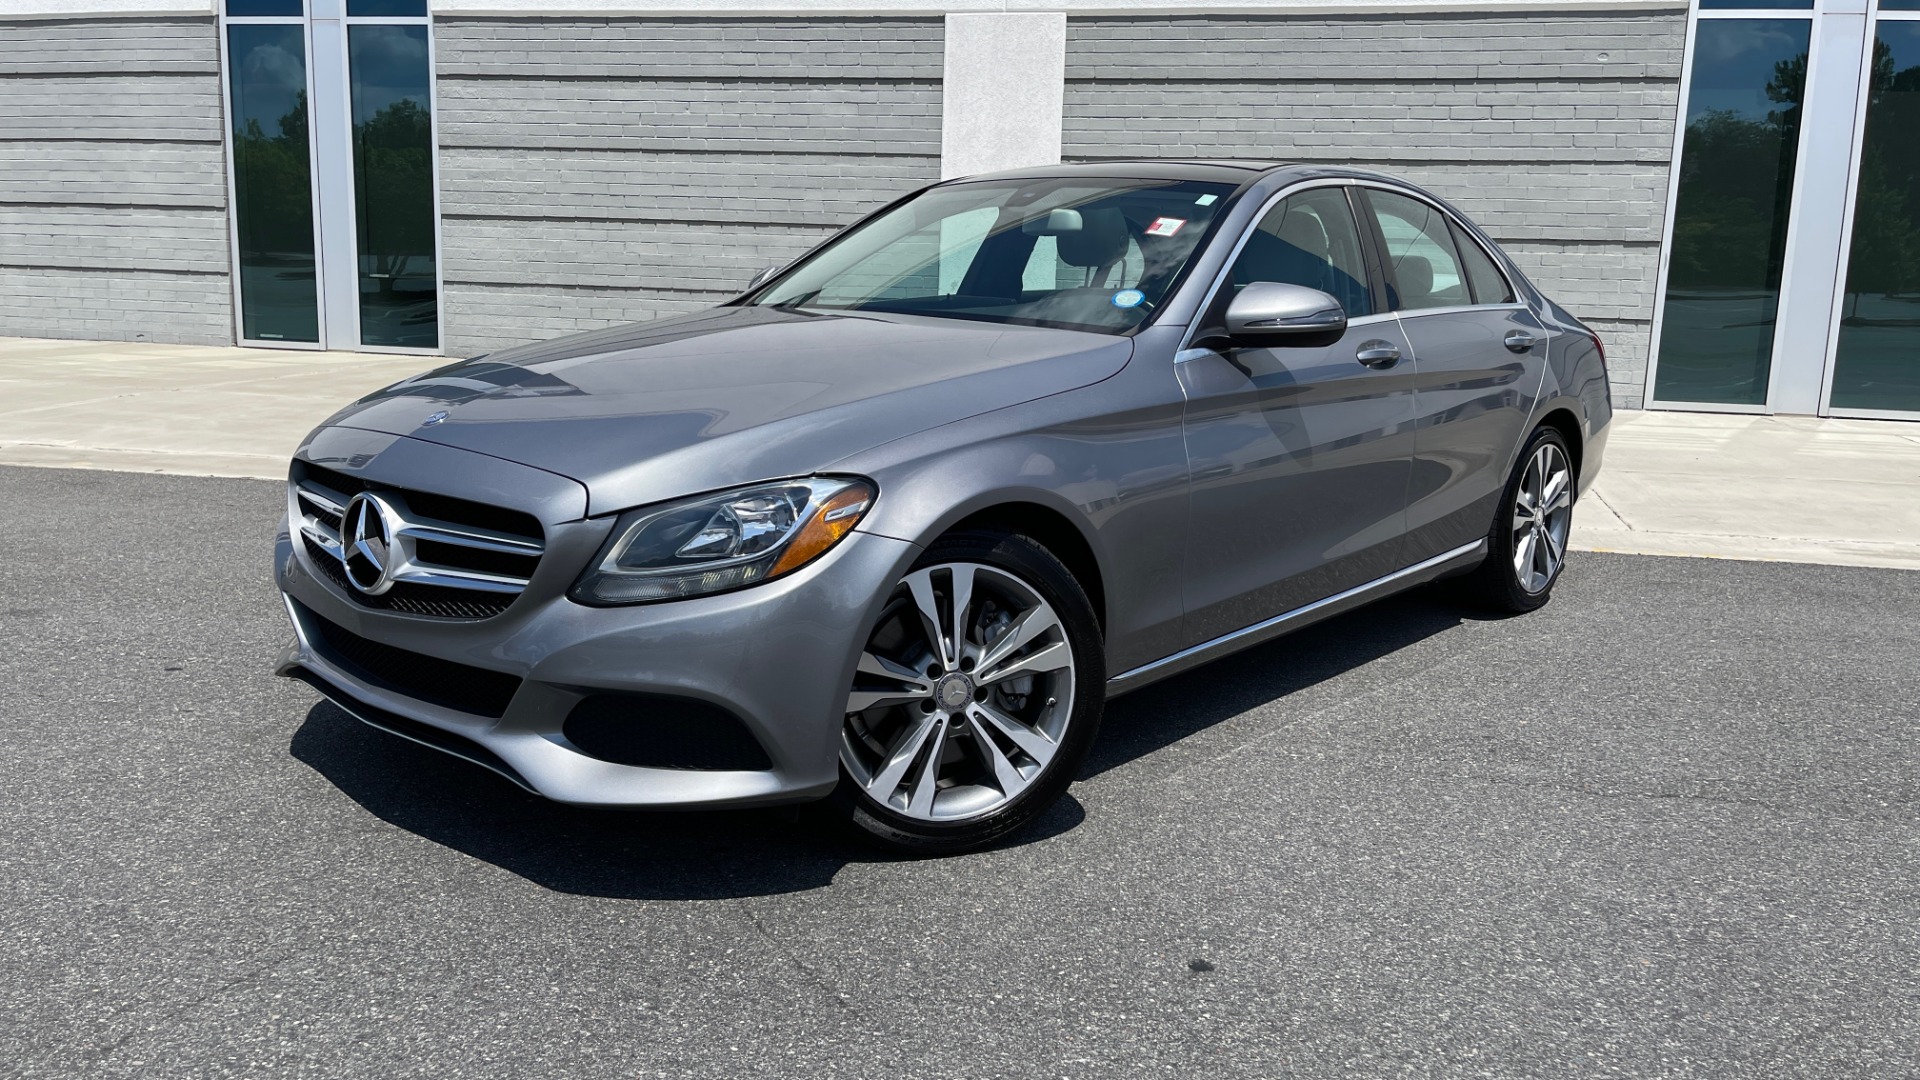 Used 2016 Mercedes-Benz C-CLASS C 300 / PREMIUM / NAV / PANO-ROOF / BSA / REARVIEW for sale Sold at Formula Imports in Charlotte NC 28227 1